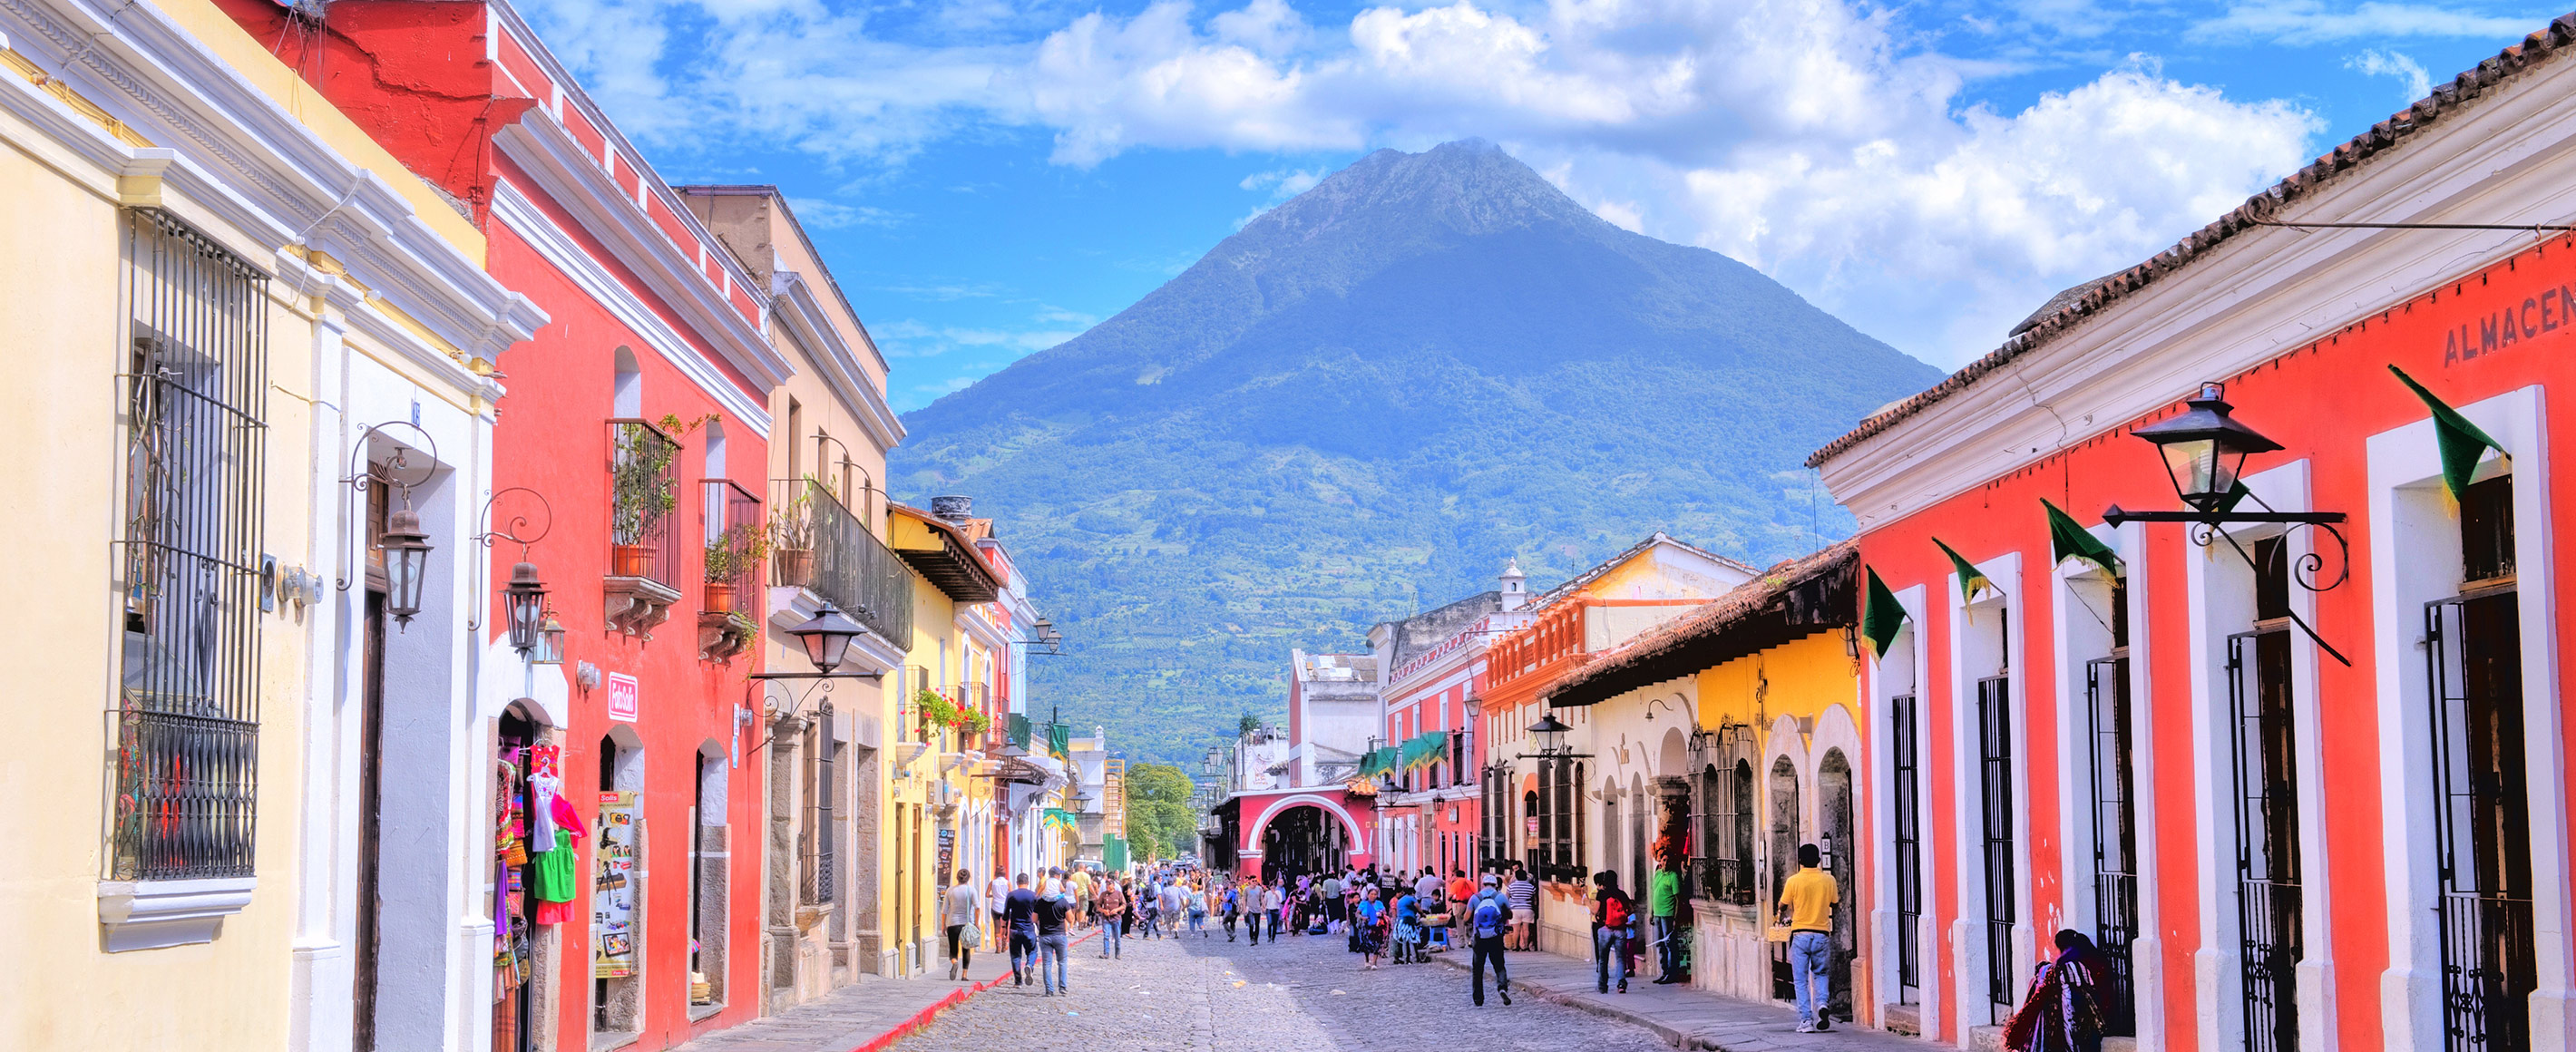 Everything you need to know about becoming an international teacher in Guatemala